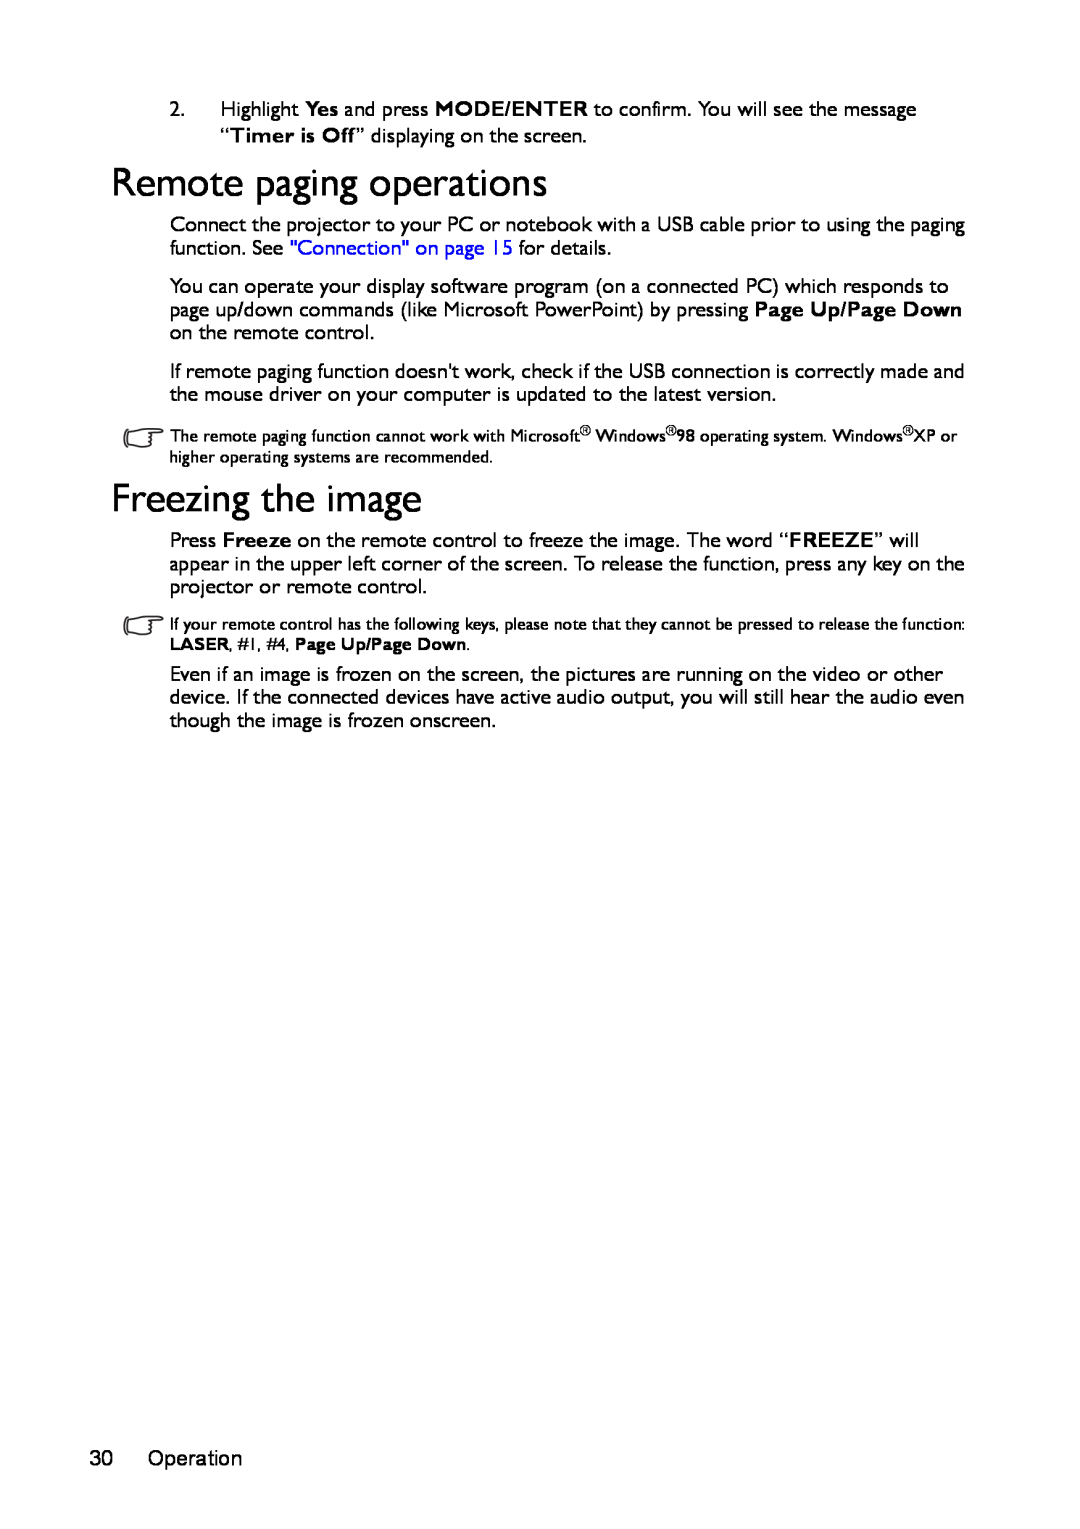 BenQ mx618st, ms616st user manual Remote paging operations, Freezing the image 